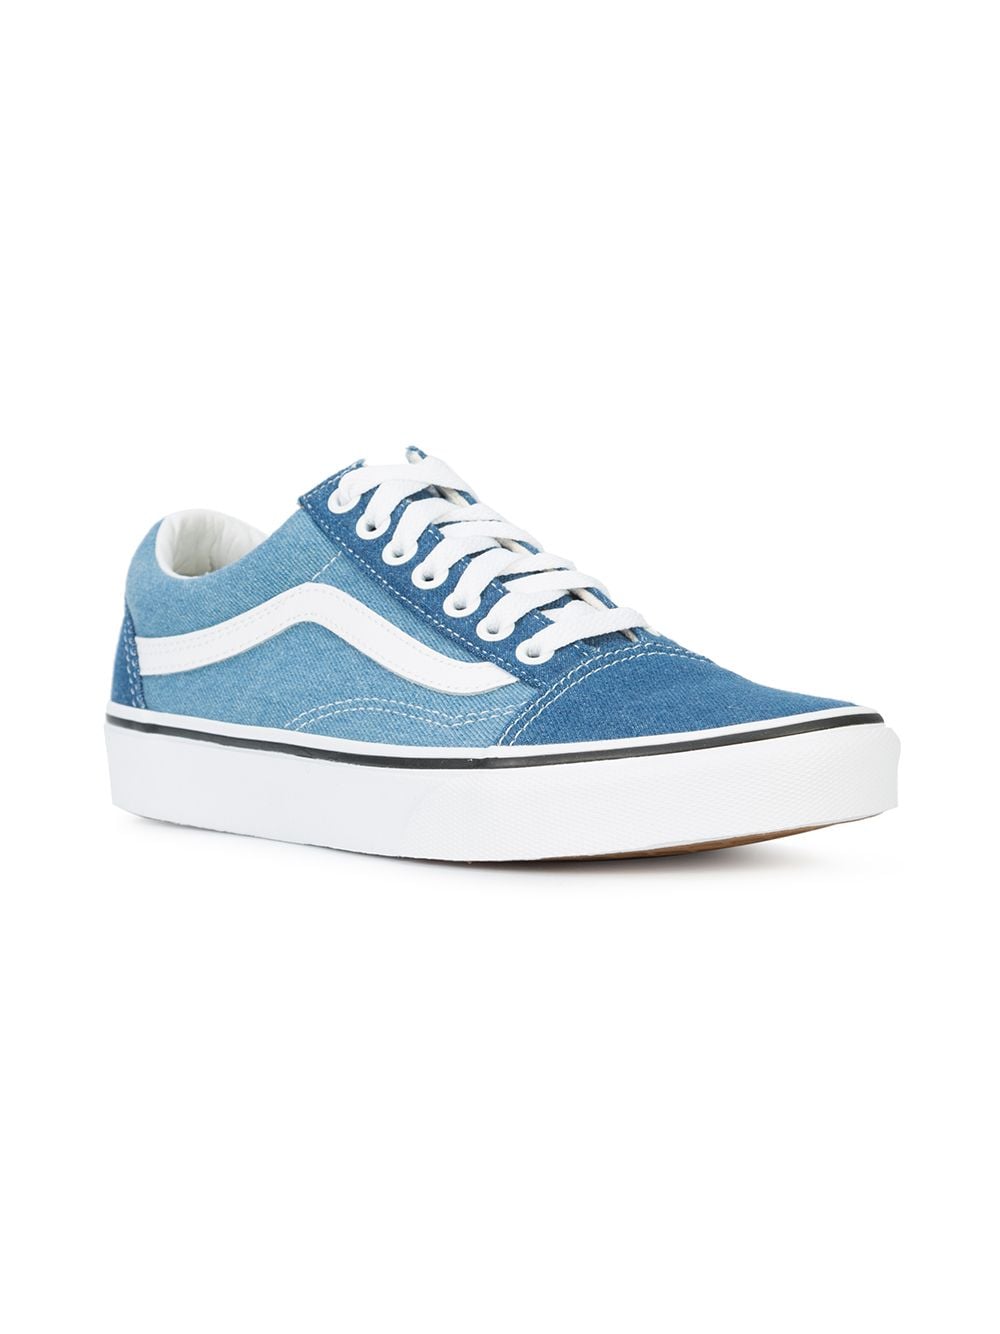 Vans Old Skool denim lace-up sneakers $65 - Shop SS18 Online - Fast  Delivery, Price